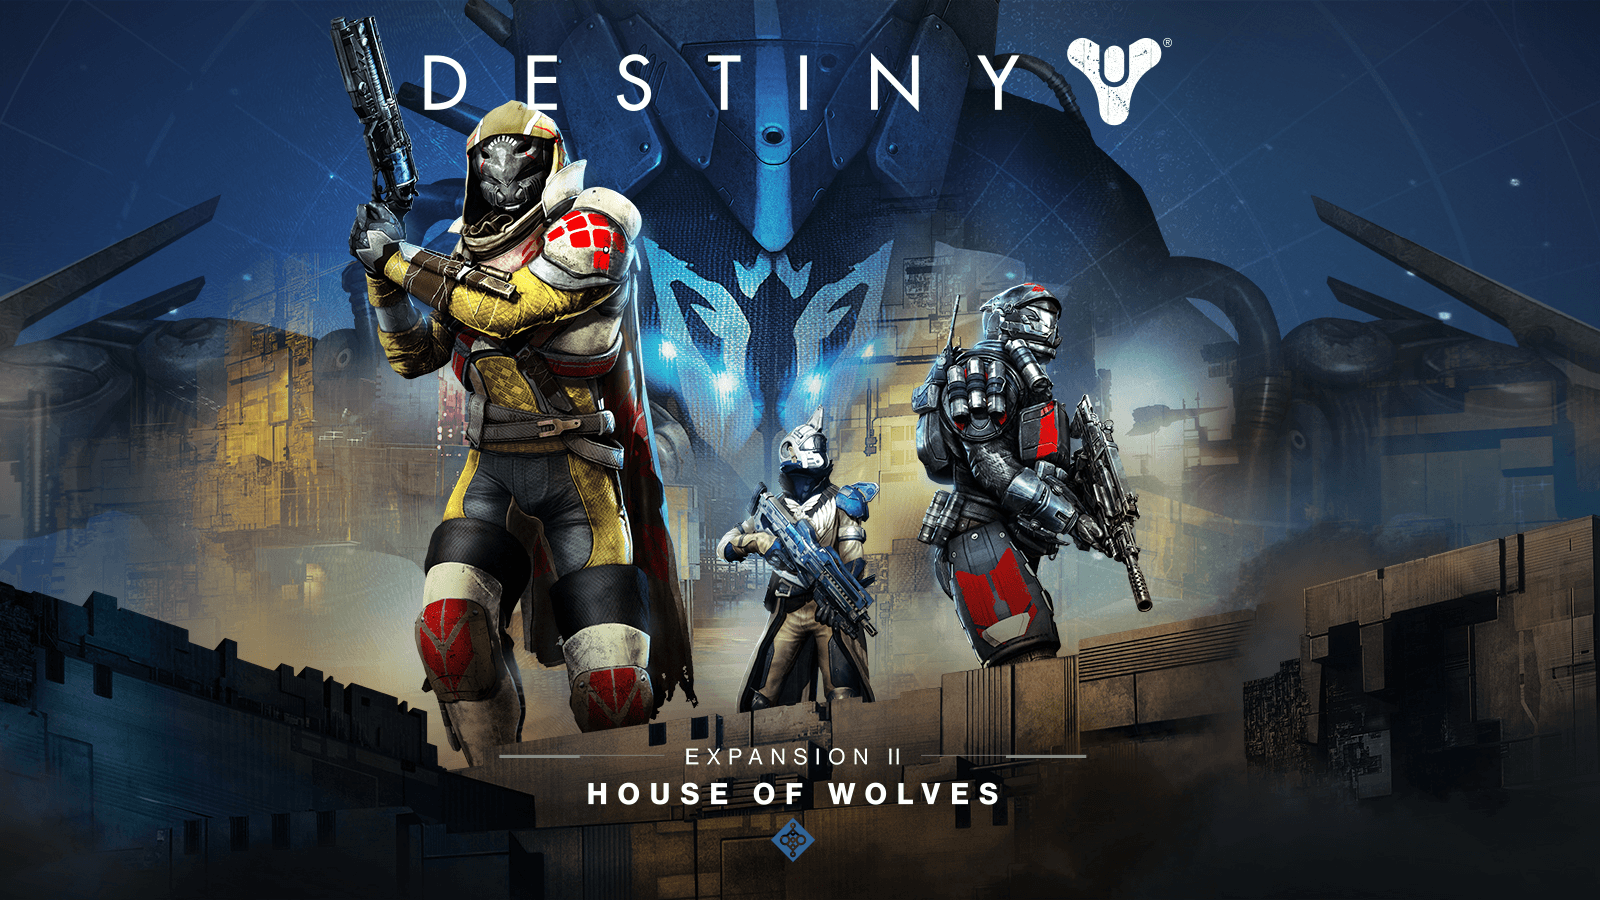 House of Wolves Destiny Logo - Destiny Expansion II: House of Wolves Game | PS3 - PlayStation